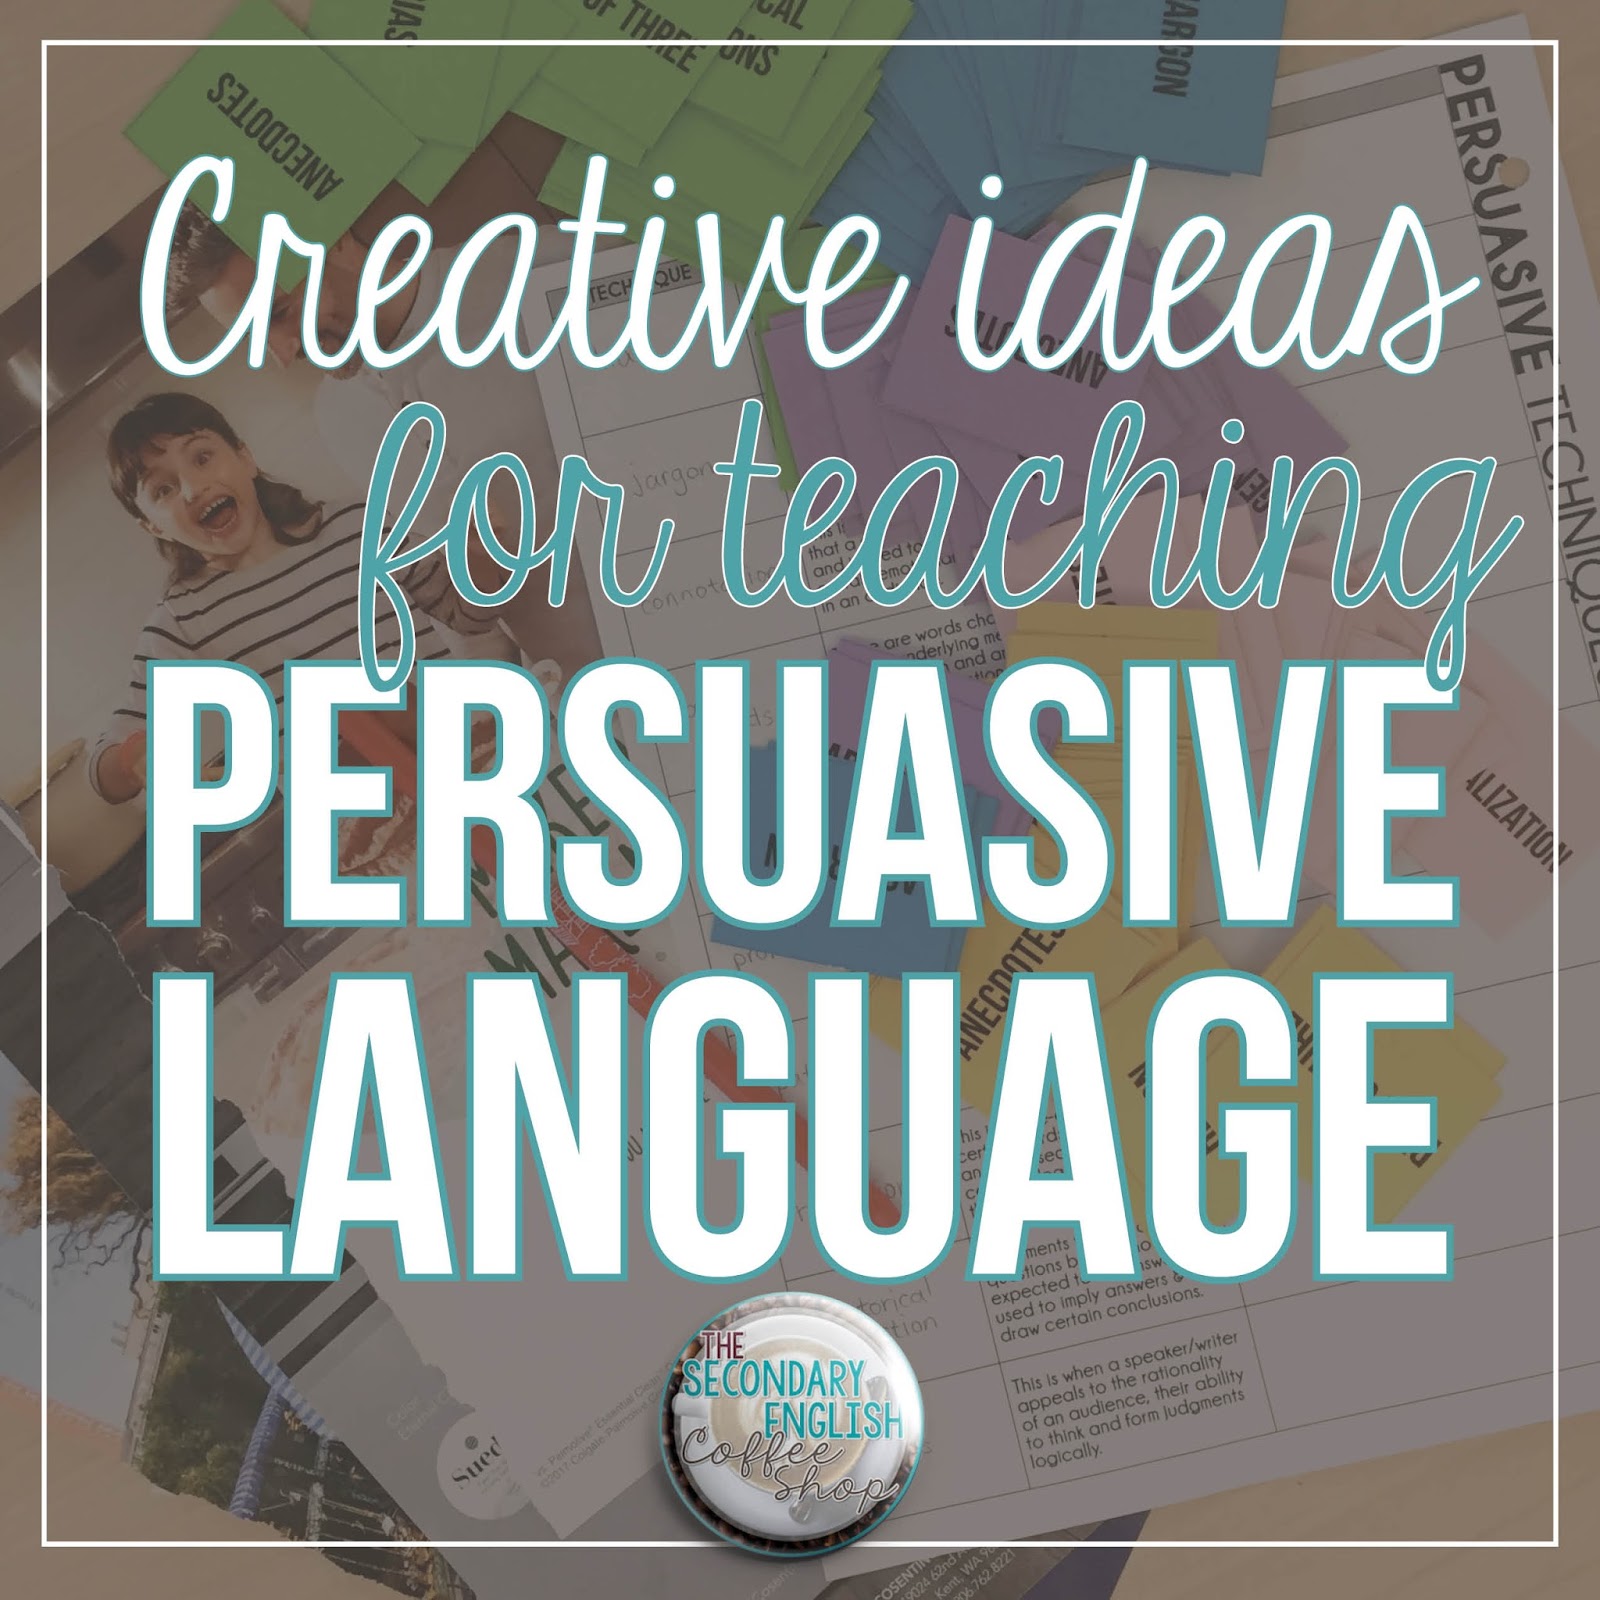 Persuasive Writing Unit | World's Greatest Invention | Distance Learning